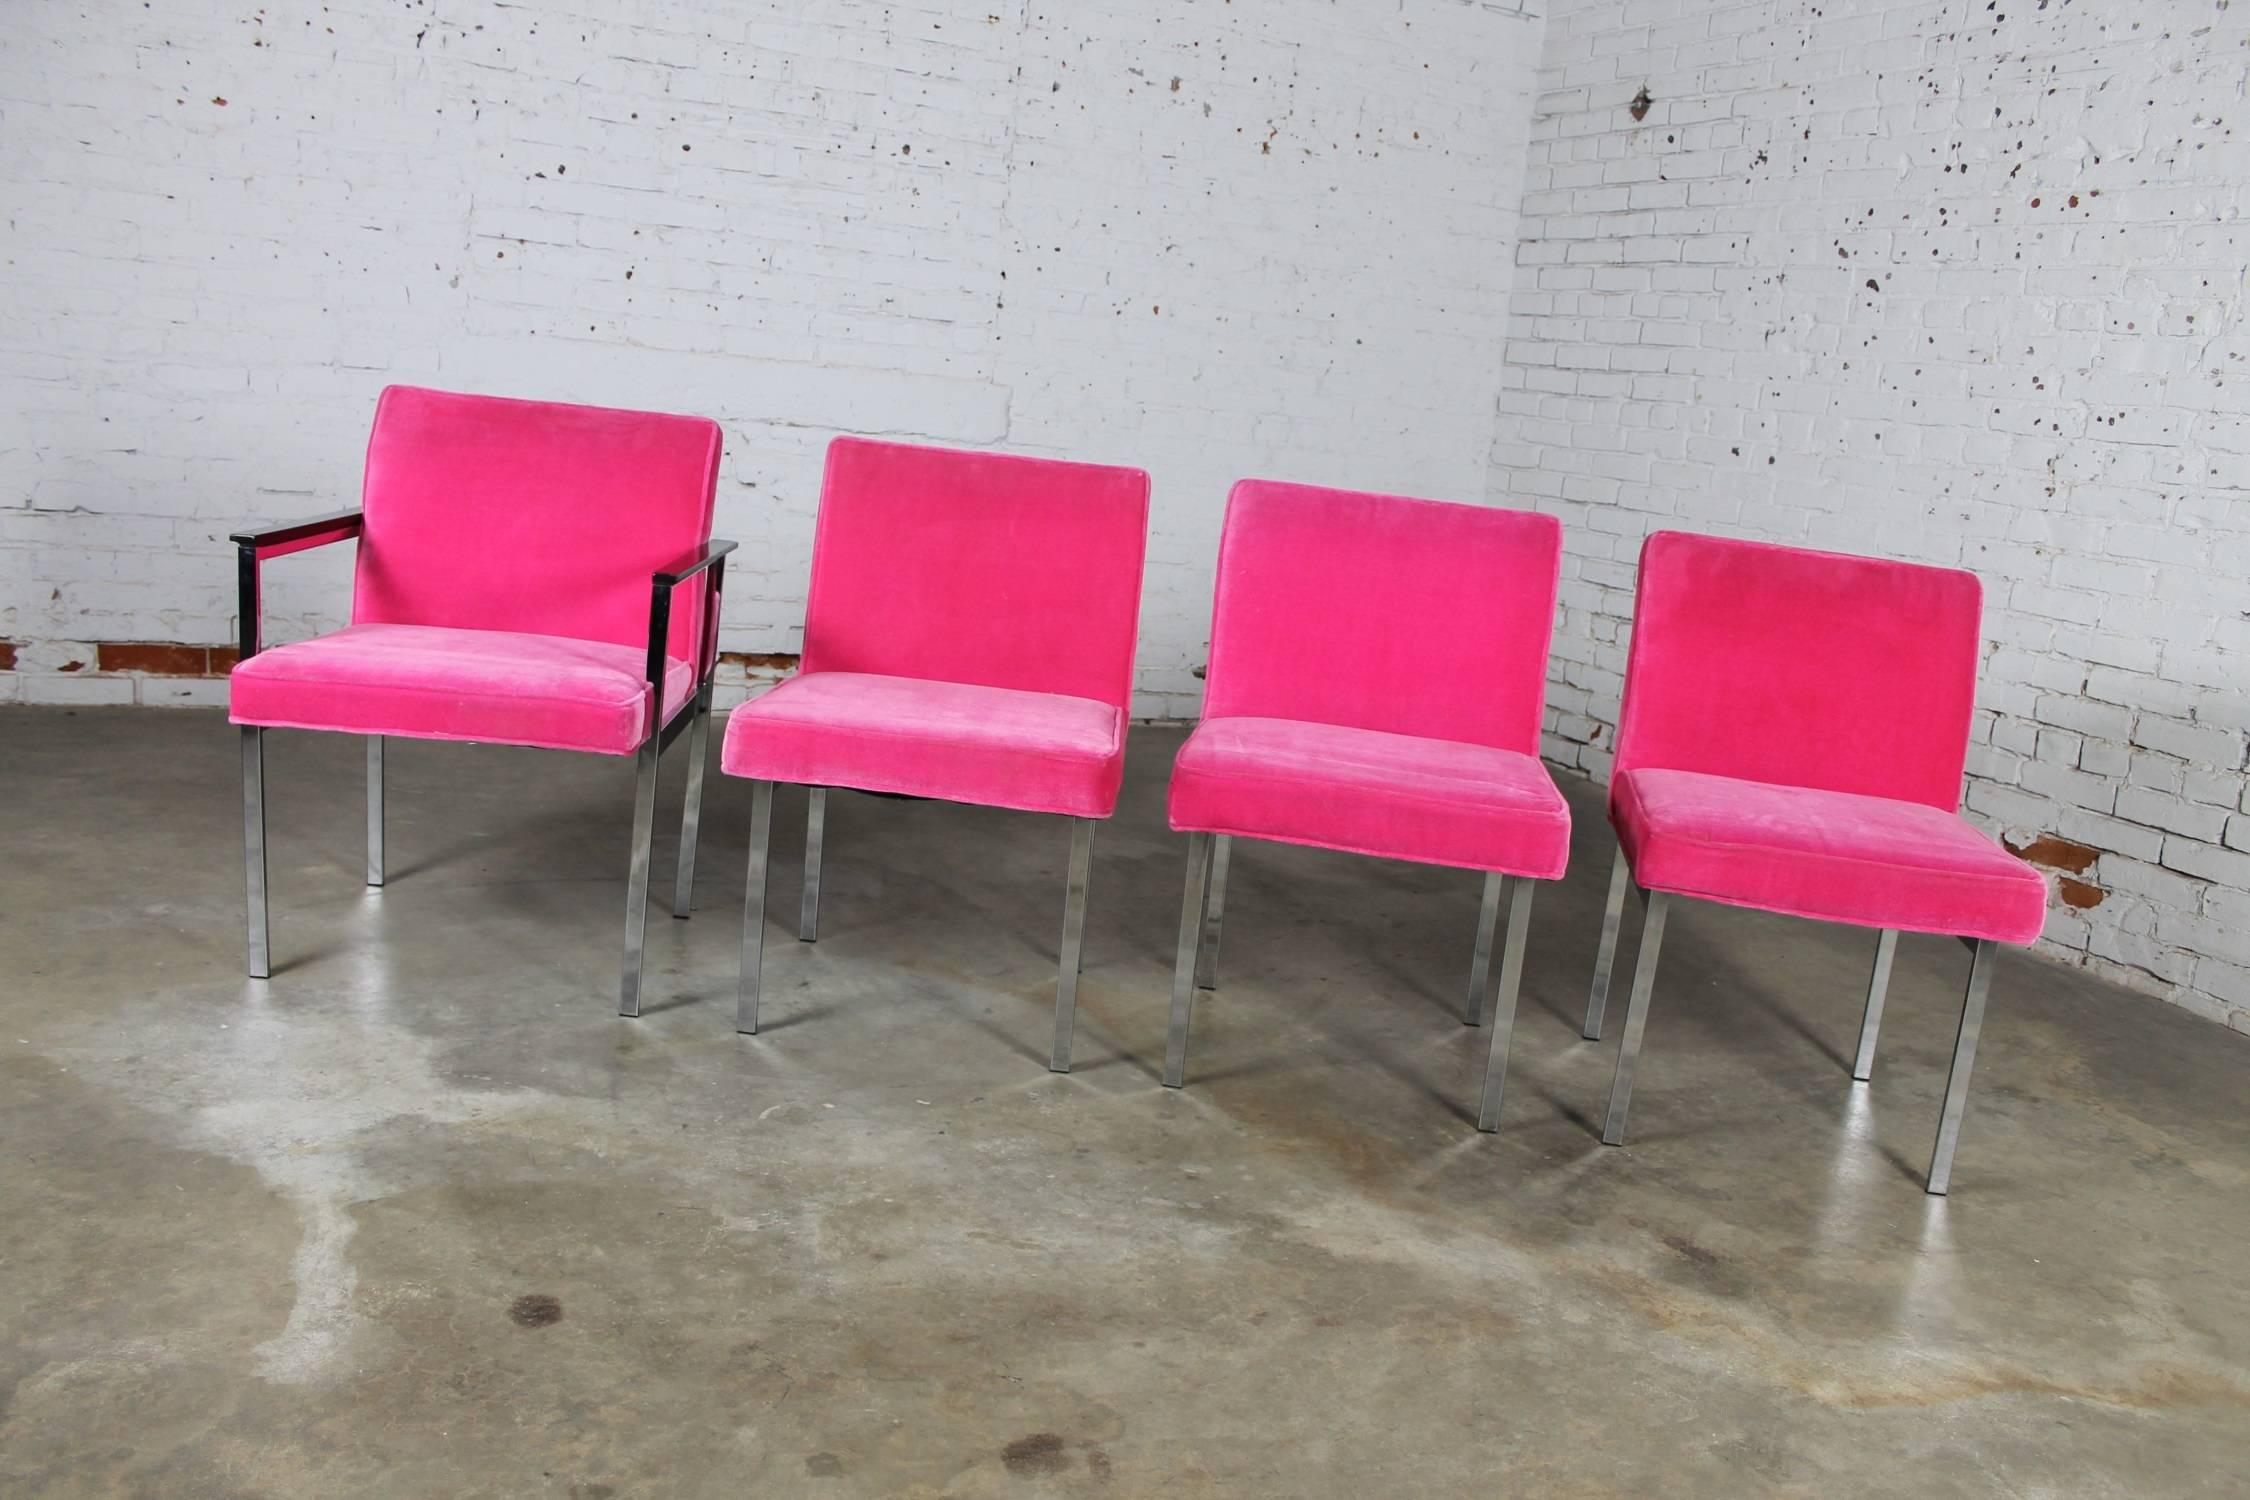 Awesome set of four hot pink and chrome dining chairs, one with arms by American Furniture Company, Inc. of Martinsville, Virginia. They are vintage Mid-Century Modern in the style of Milo Baughman and in absolutely incredible condition, circa